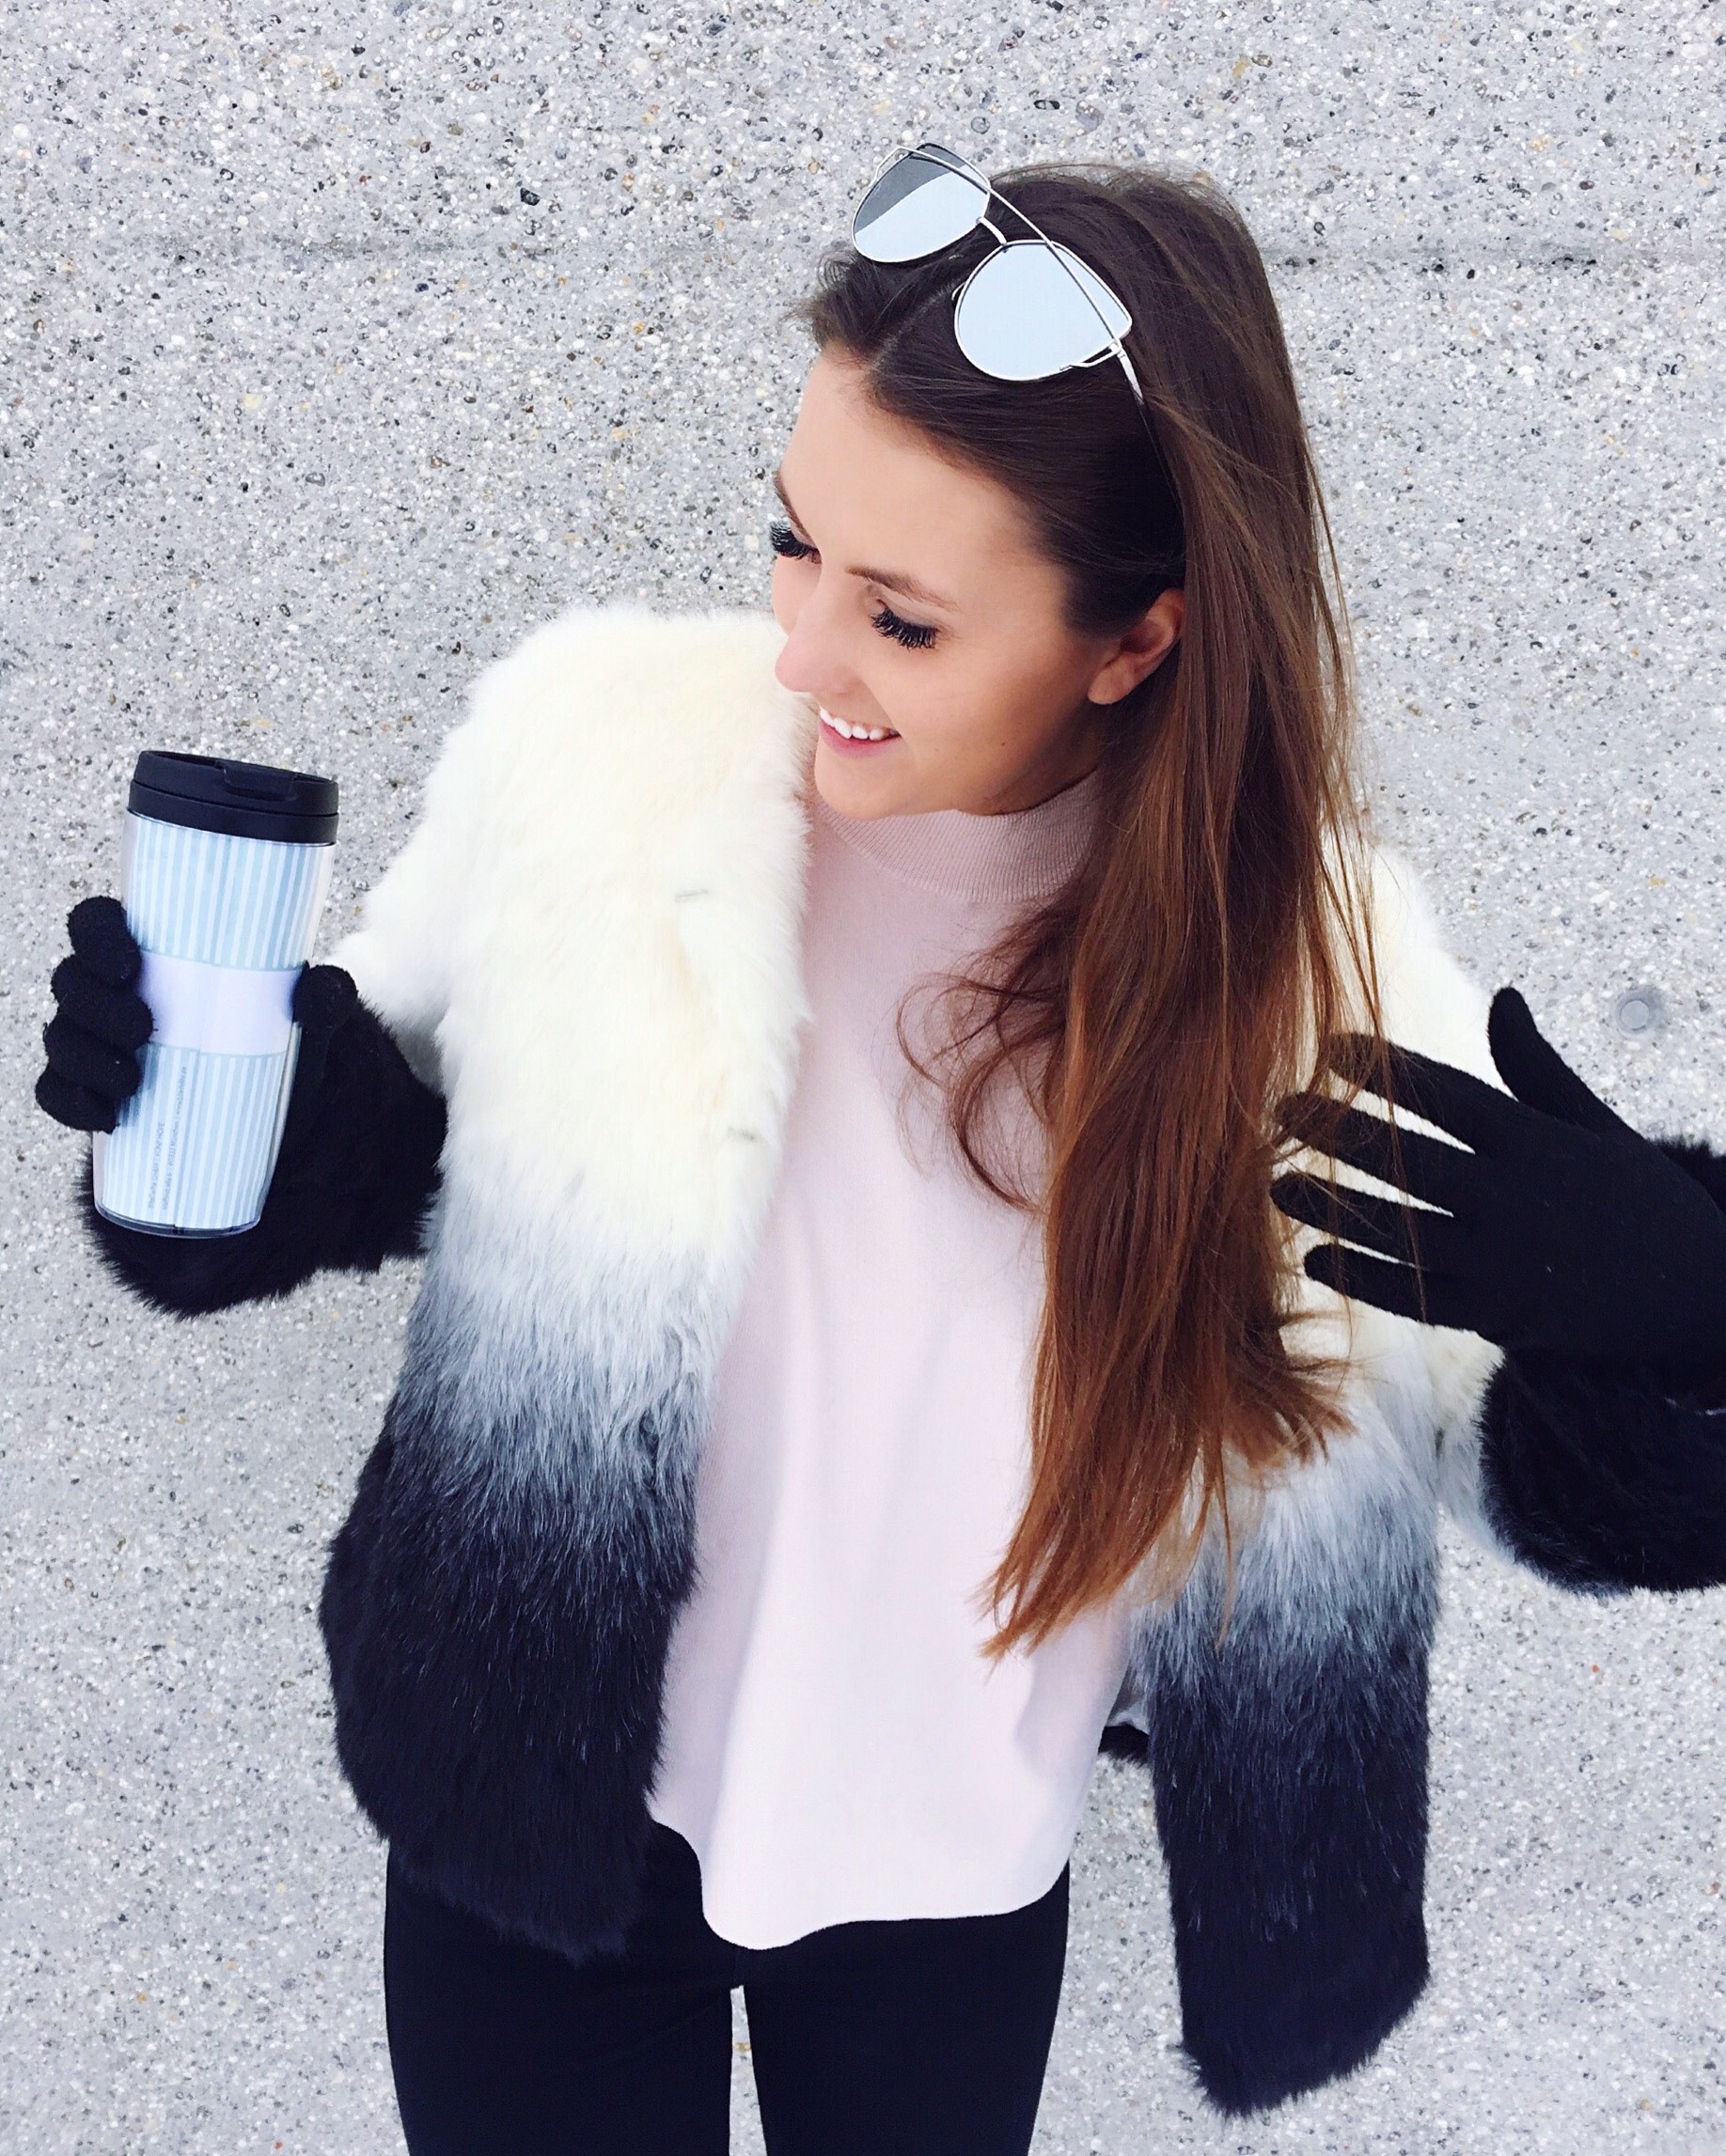 Fluffy Winter Outfit